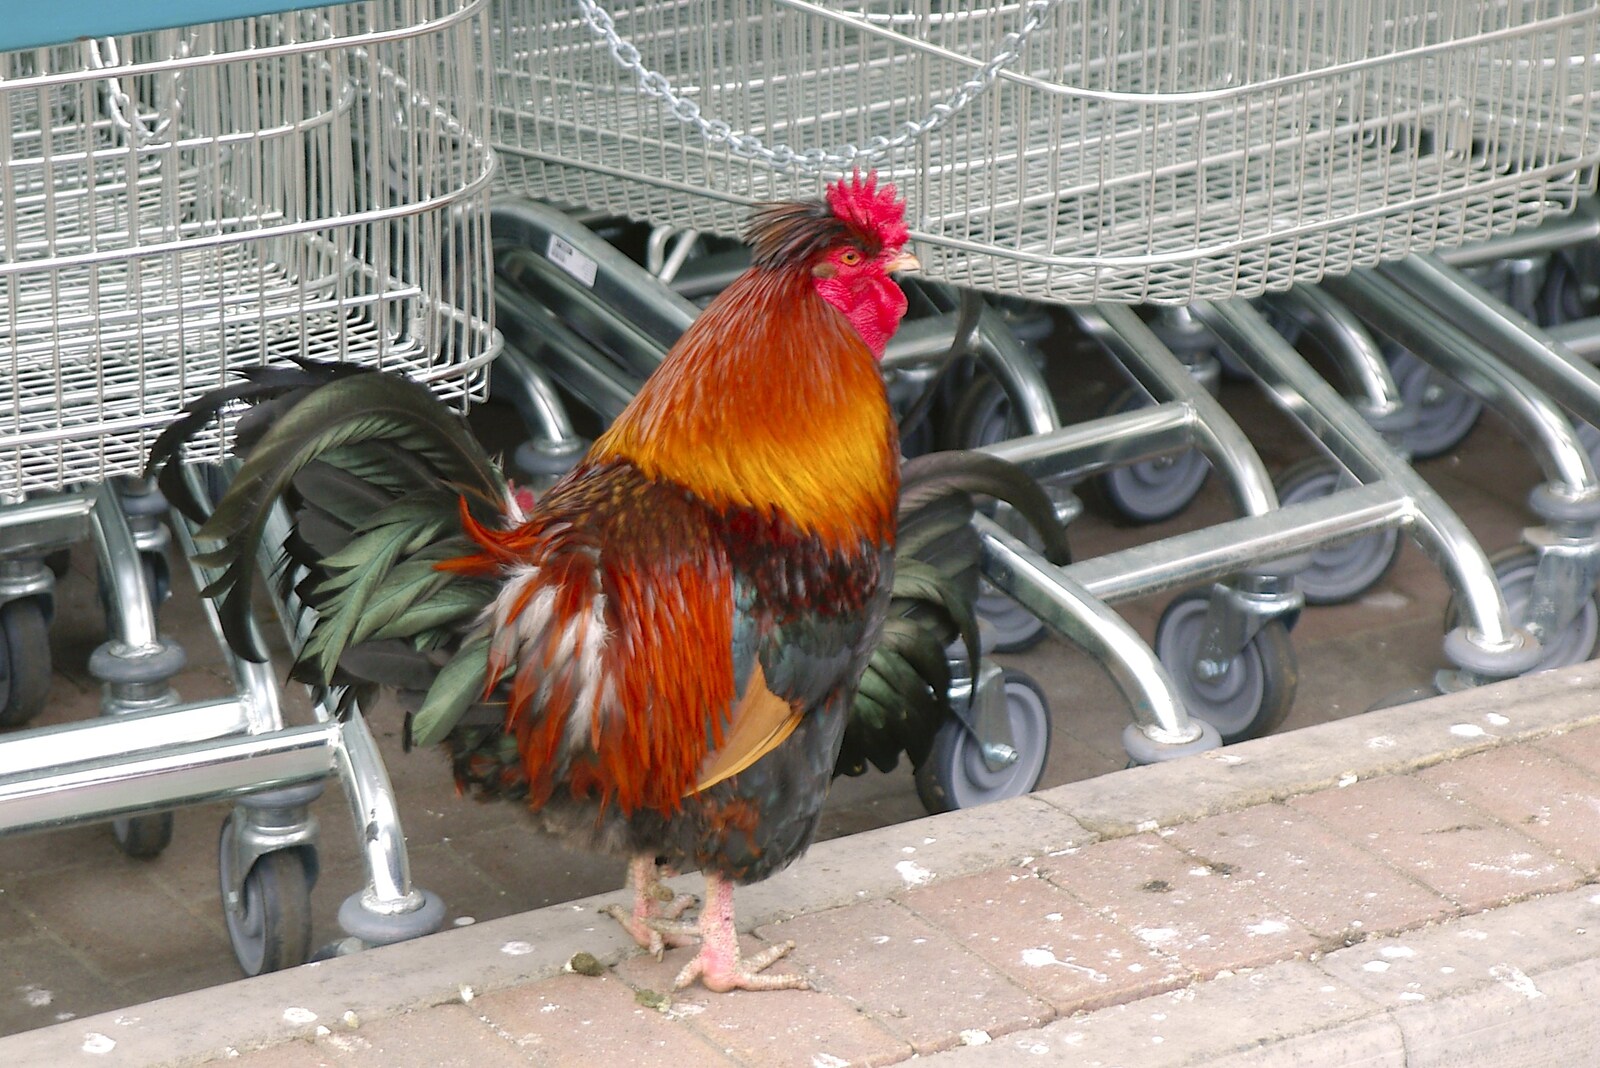 A cockerel pokes about near the trolleys from Dom in da Chapel, Safeway Chickens and Evil Supermarkets, Harleston and Grimston - 15th January 2006